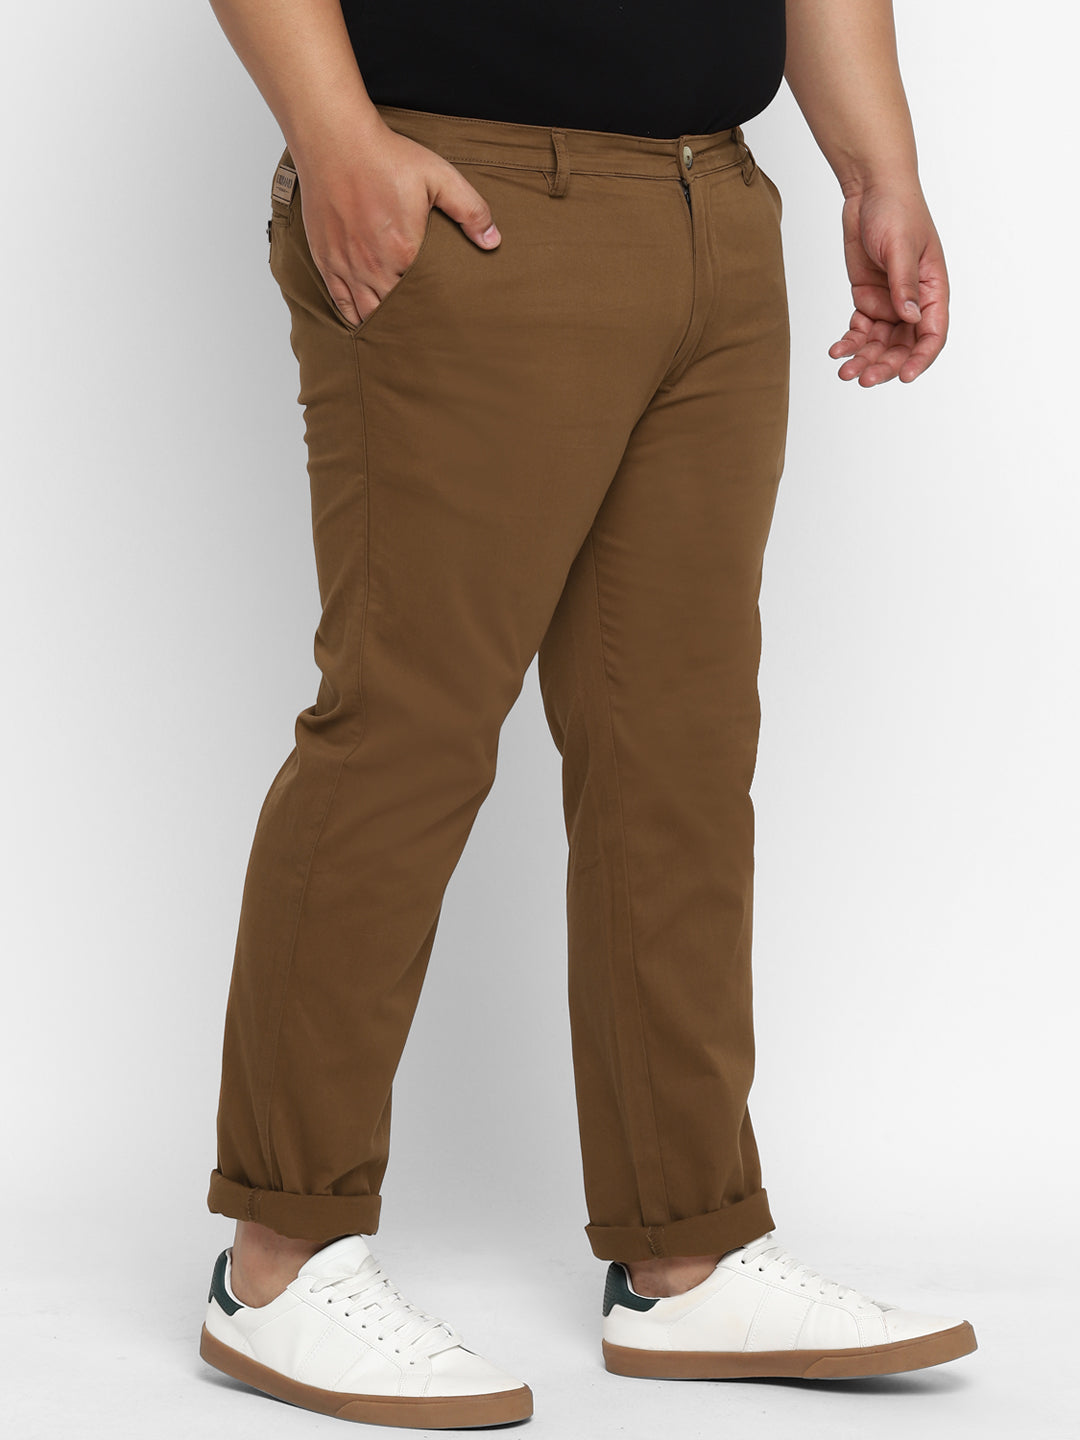 Plus Men's Brown Cotton Regular Fit Casual Chino Pants Stretch